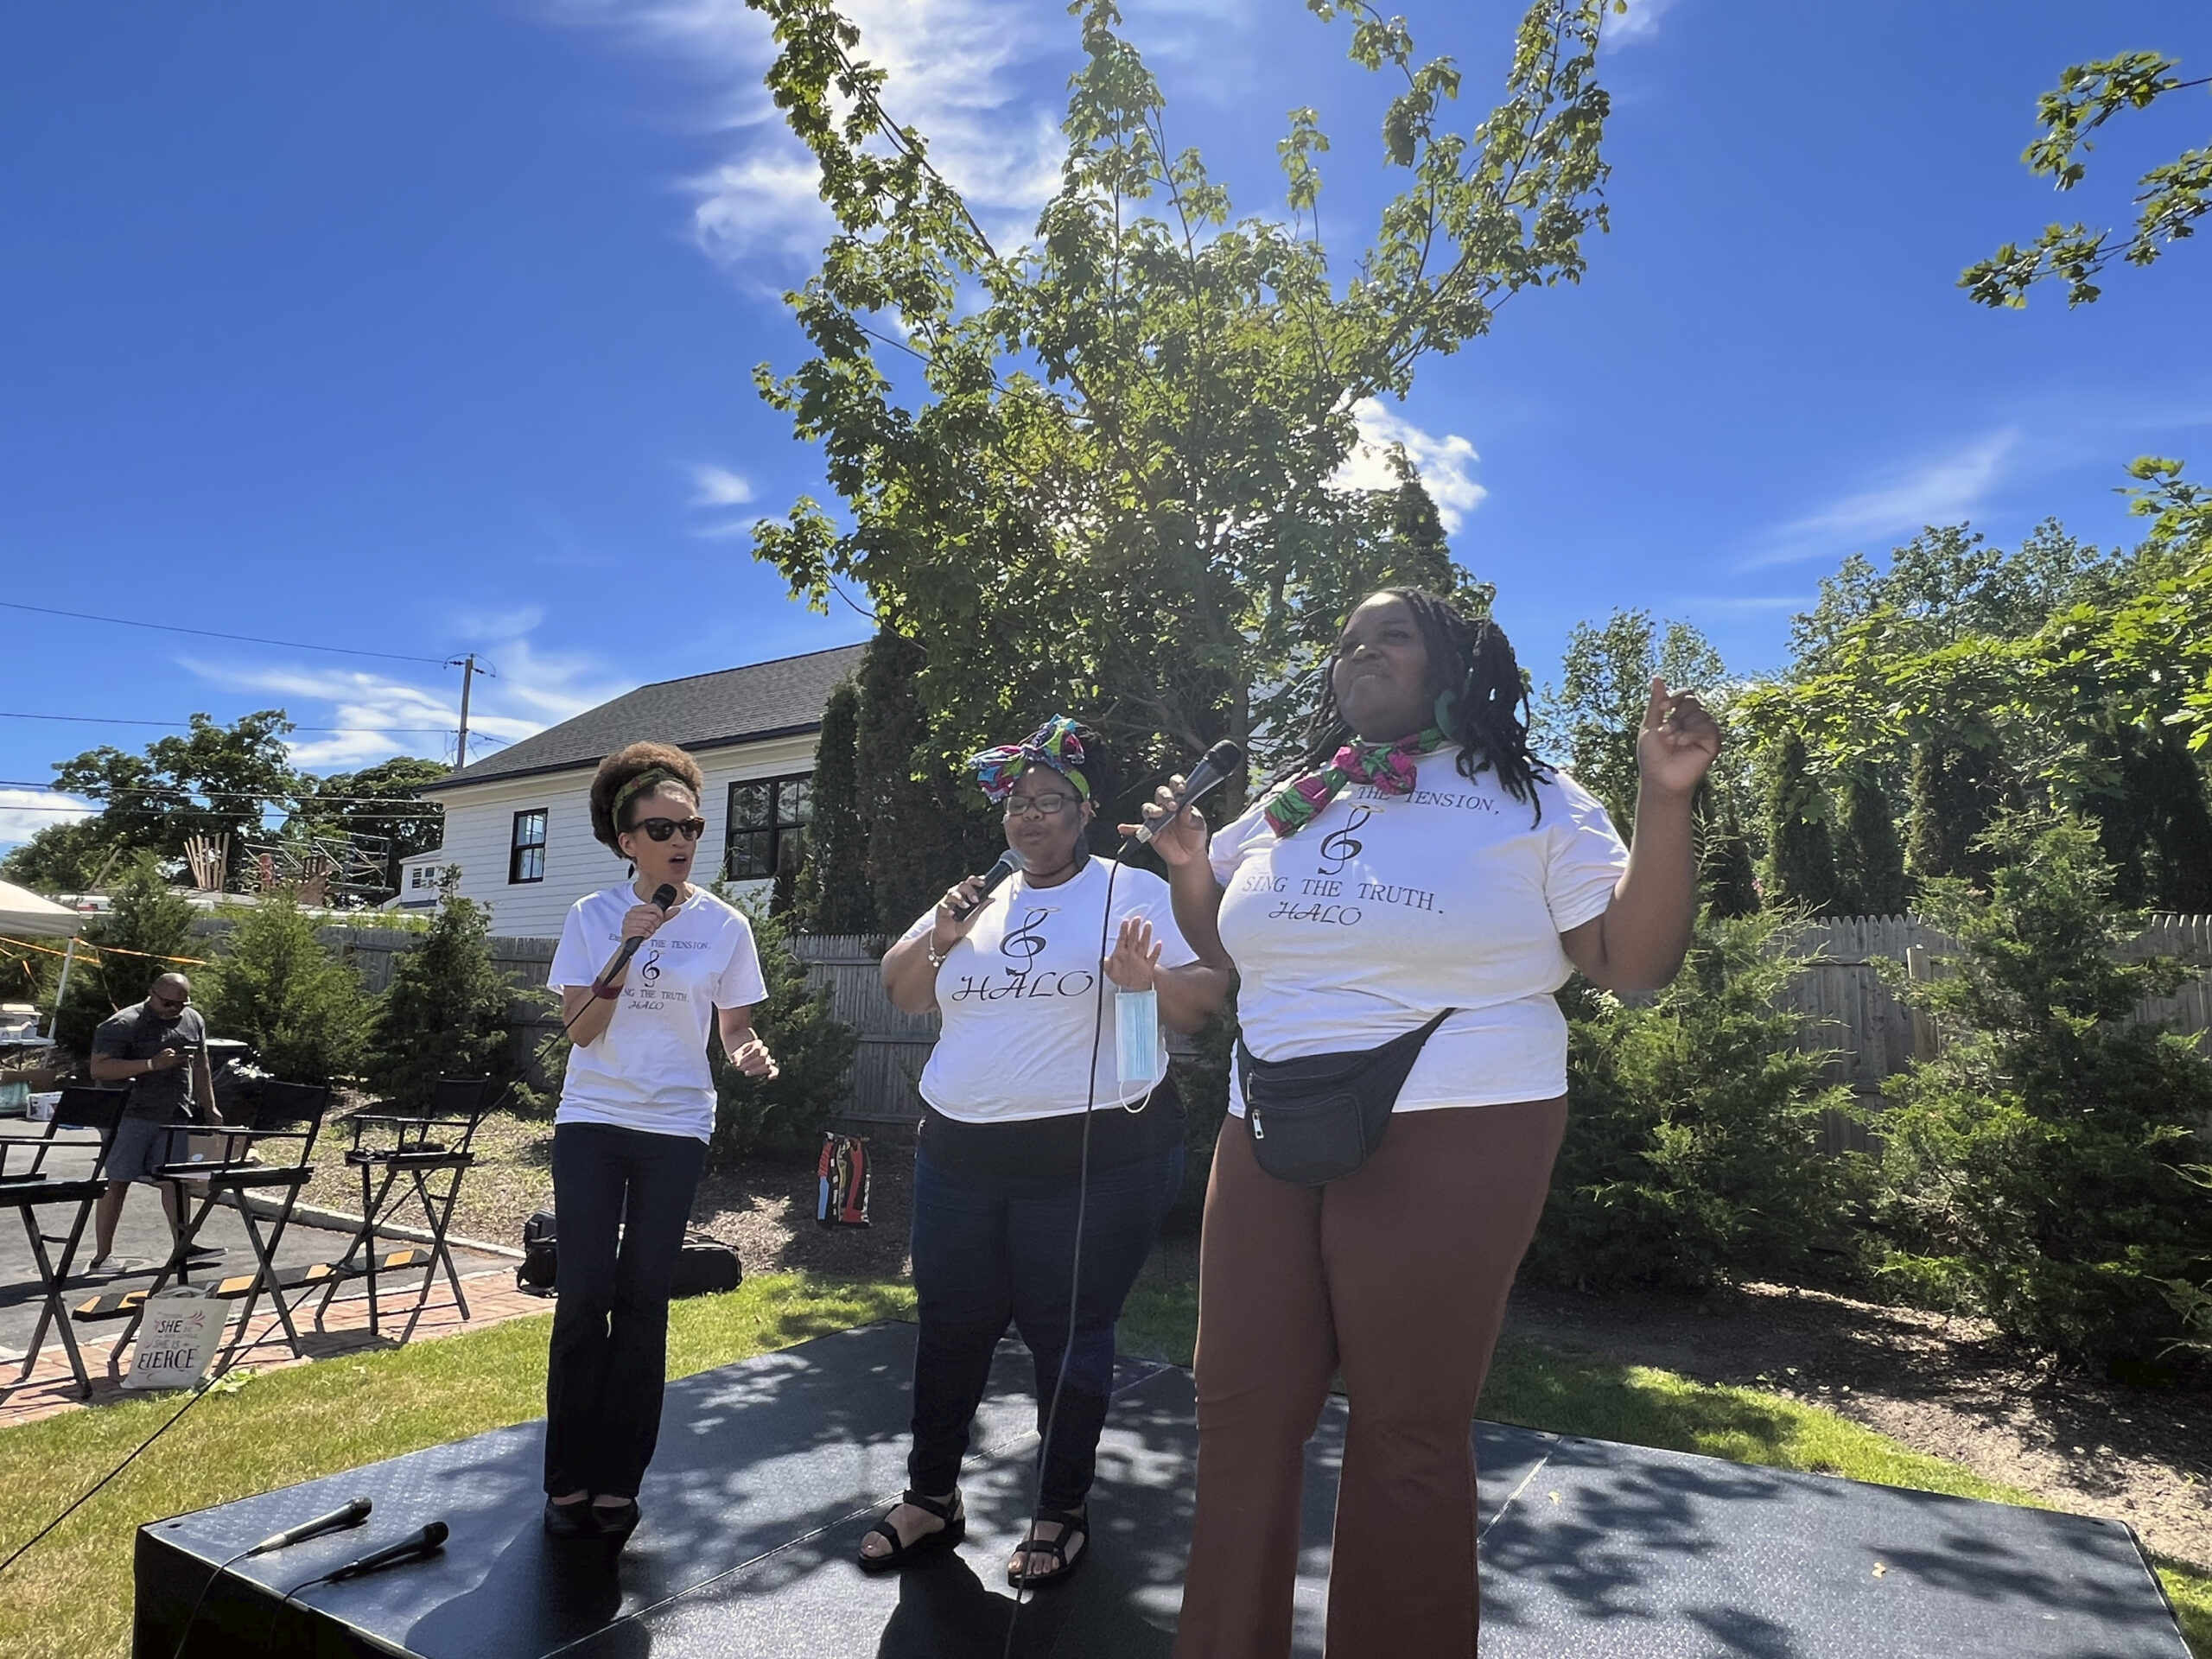 Members of Halo, an all black female barbershop acapella ensemble from Washington, DC, performs at the Southampton African American Museum's Juneteenth celebration on Saturday.  DANA SHAW